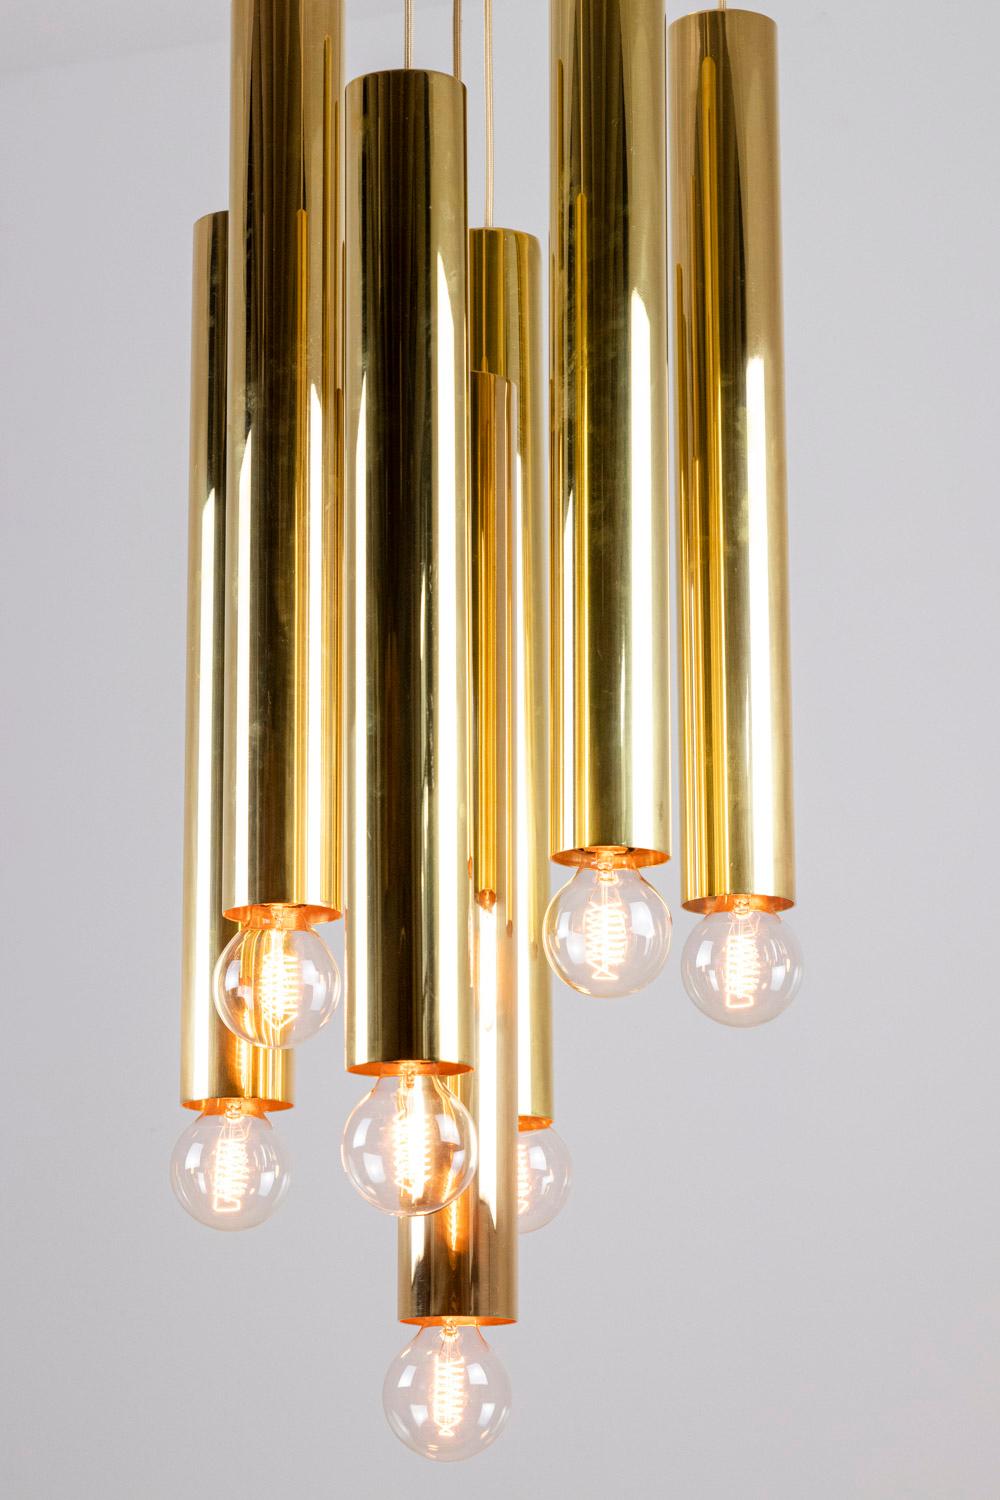 Maison RAAK, Chandelier with 7 Lights in Gilt Brass, 1970s In Good Condition For Sale In Saint-Ouen, FR